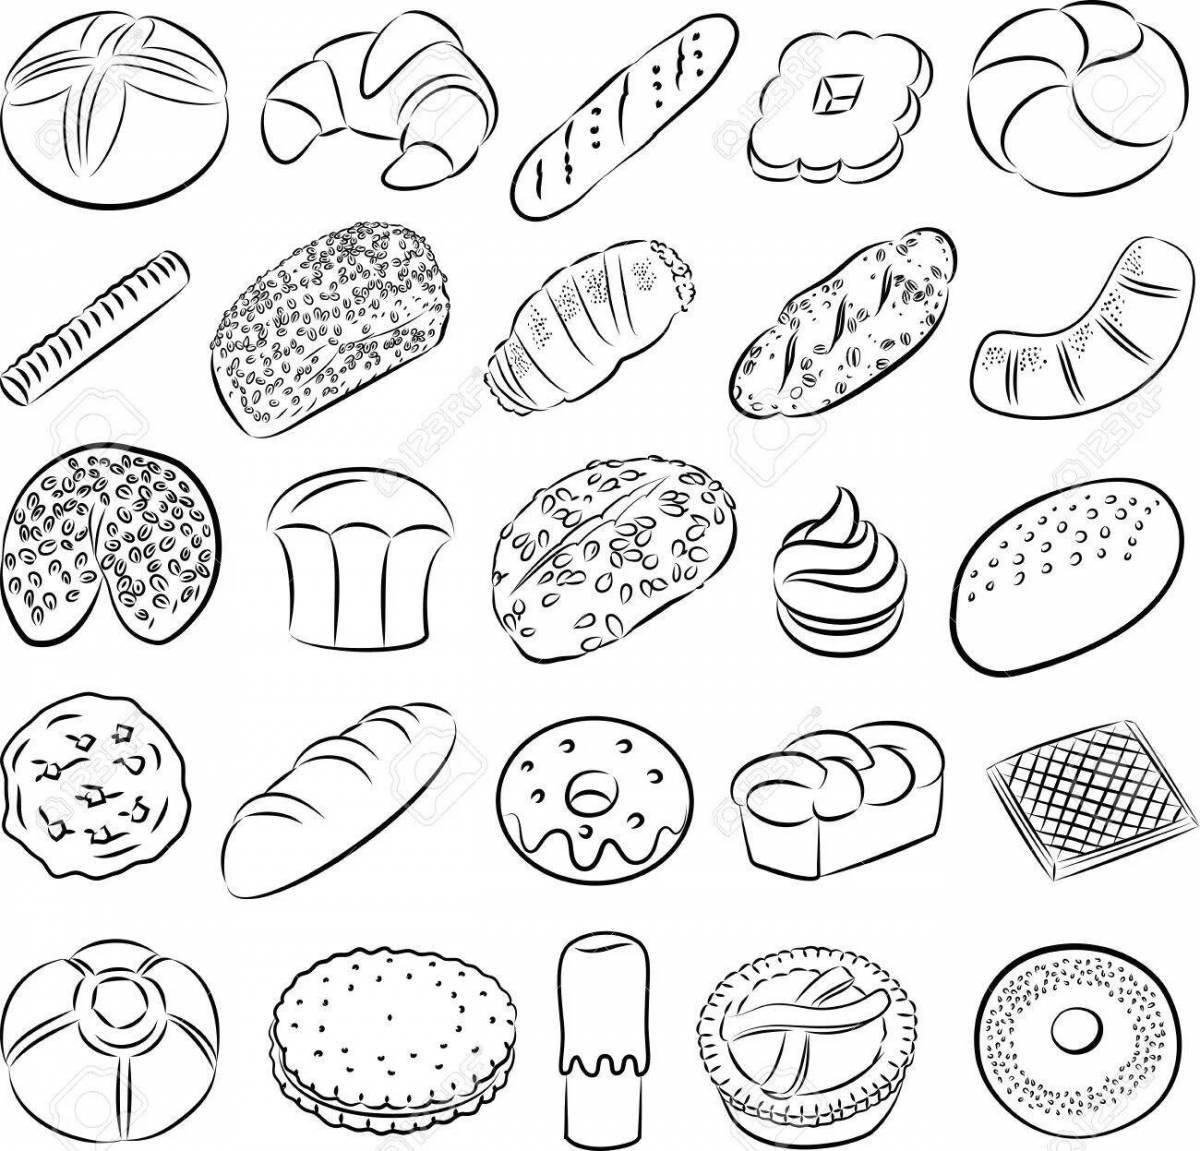 Coloring page attractive bakery products